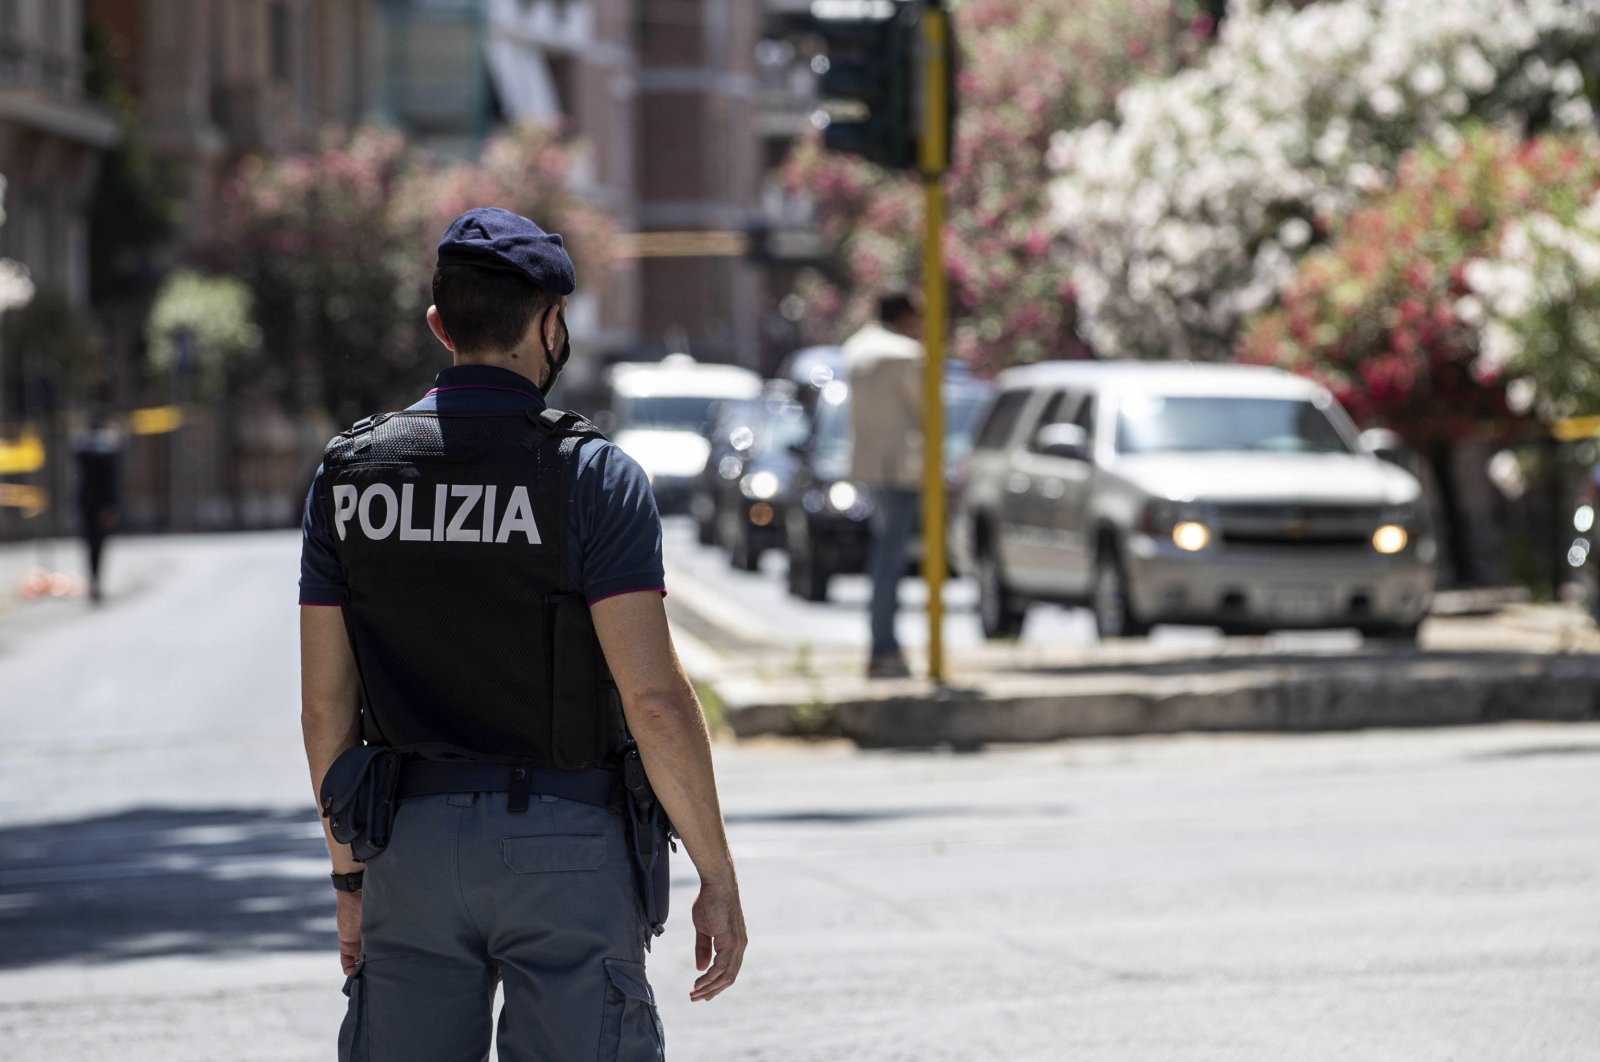 Police officers check the area near the U.S. ambassador's private residence for the arrival of U.S. Secretary of State Antony Blinken at Villa Taverna in Rome, Italy, June 27, 2021. (EPA Photo)